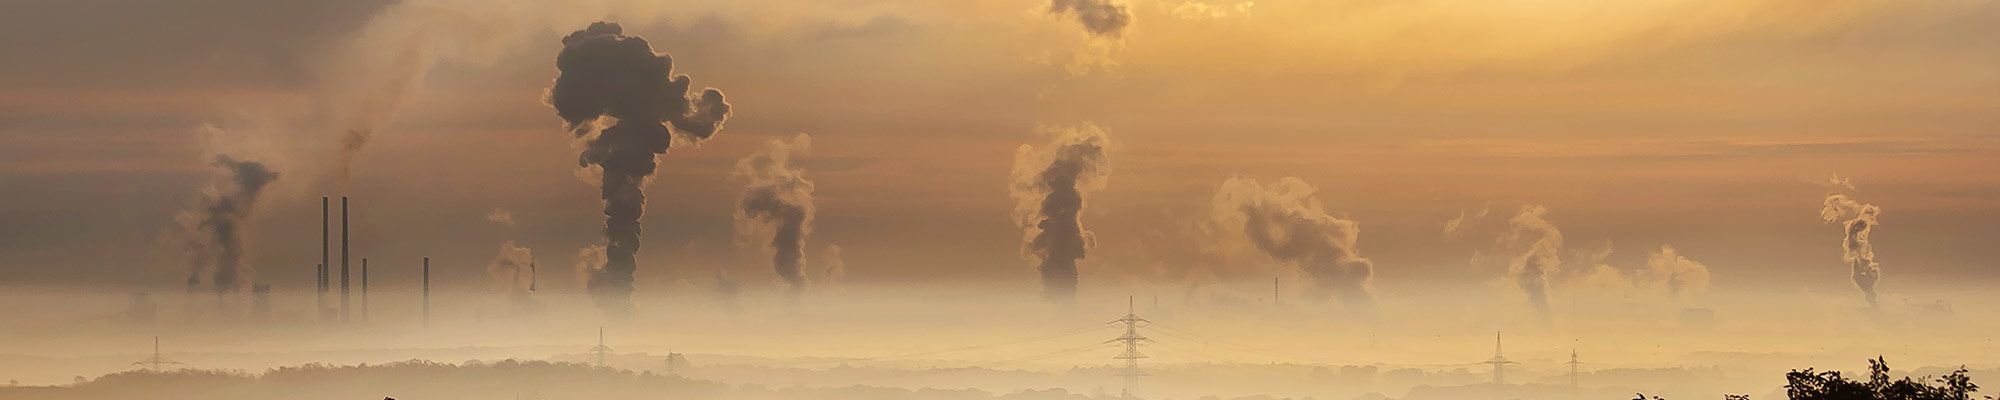 Air Quality and Pollution Instrumentation High-performance monitoring systems designed to work when human lives are at risk